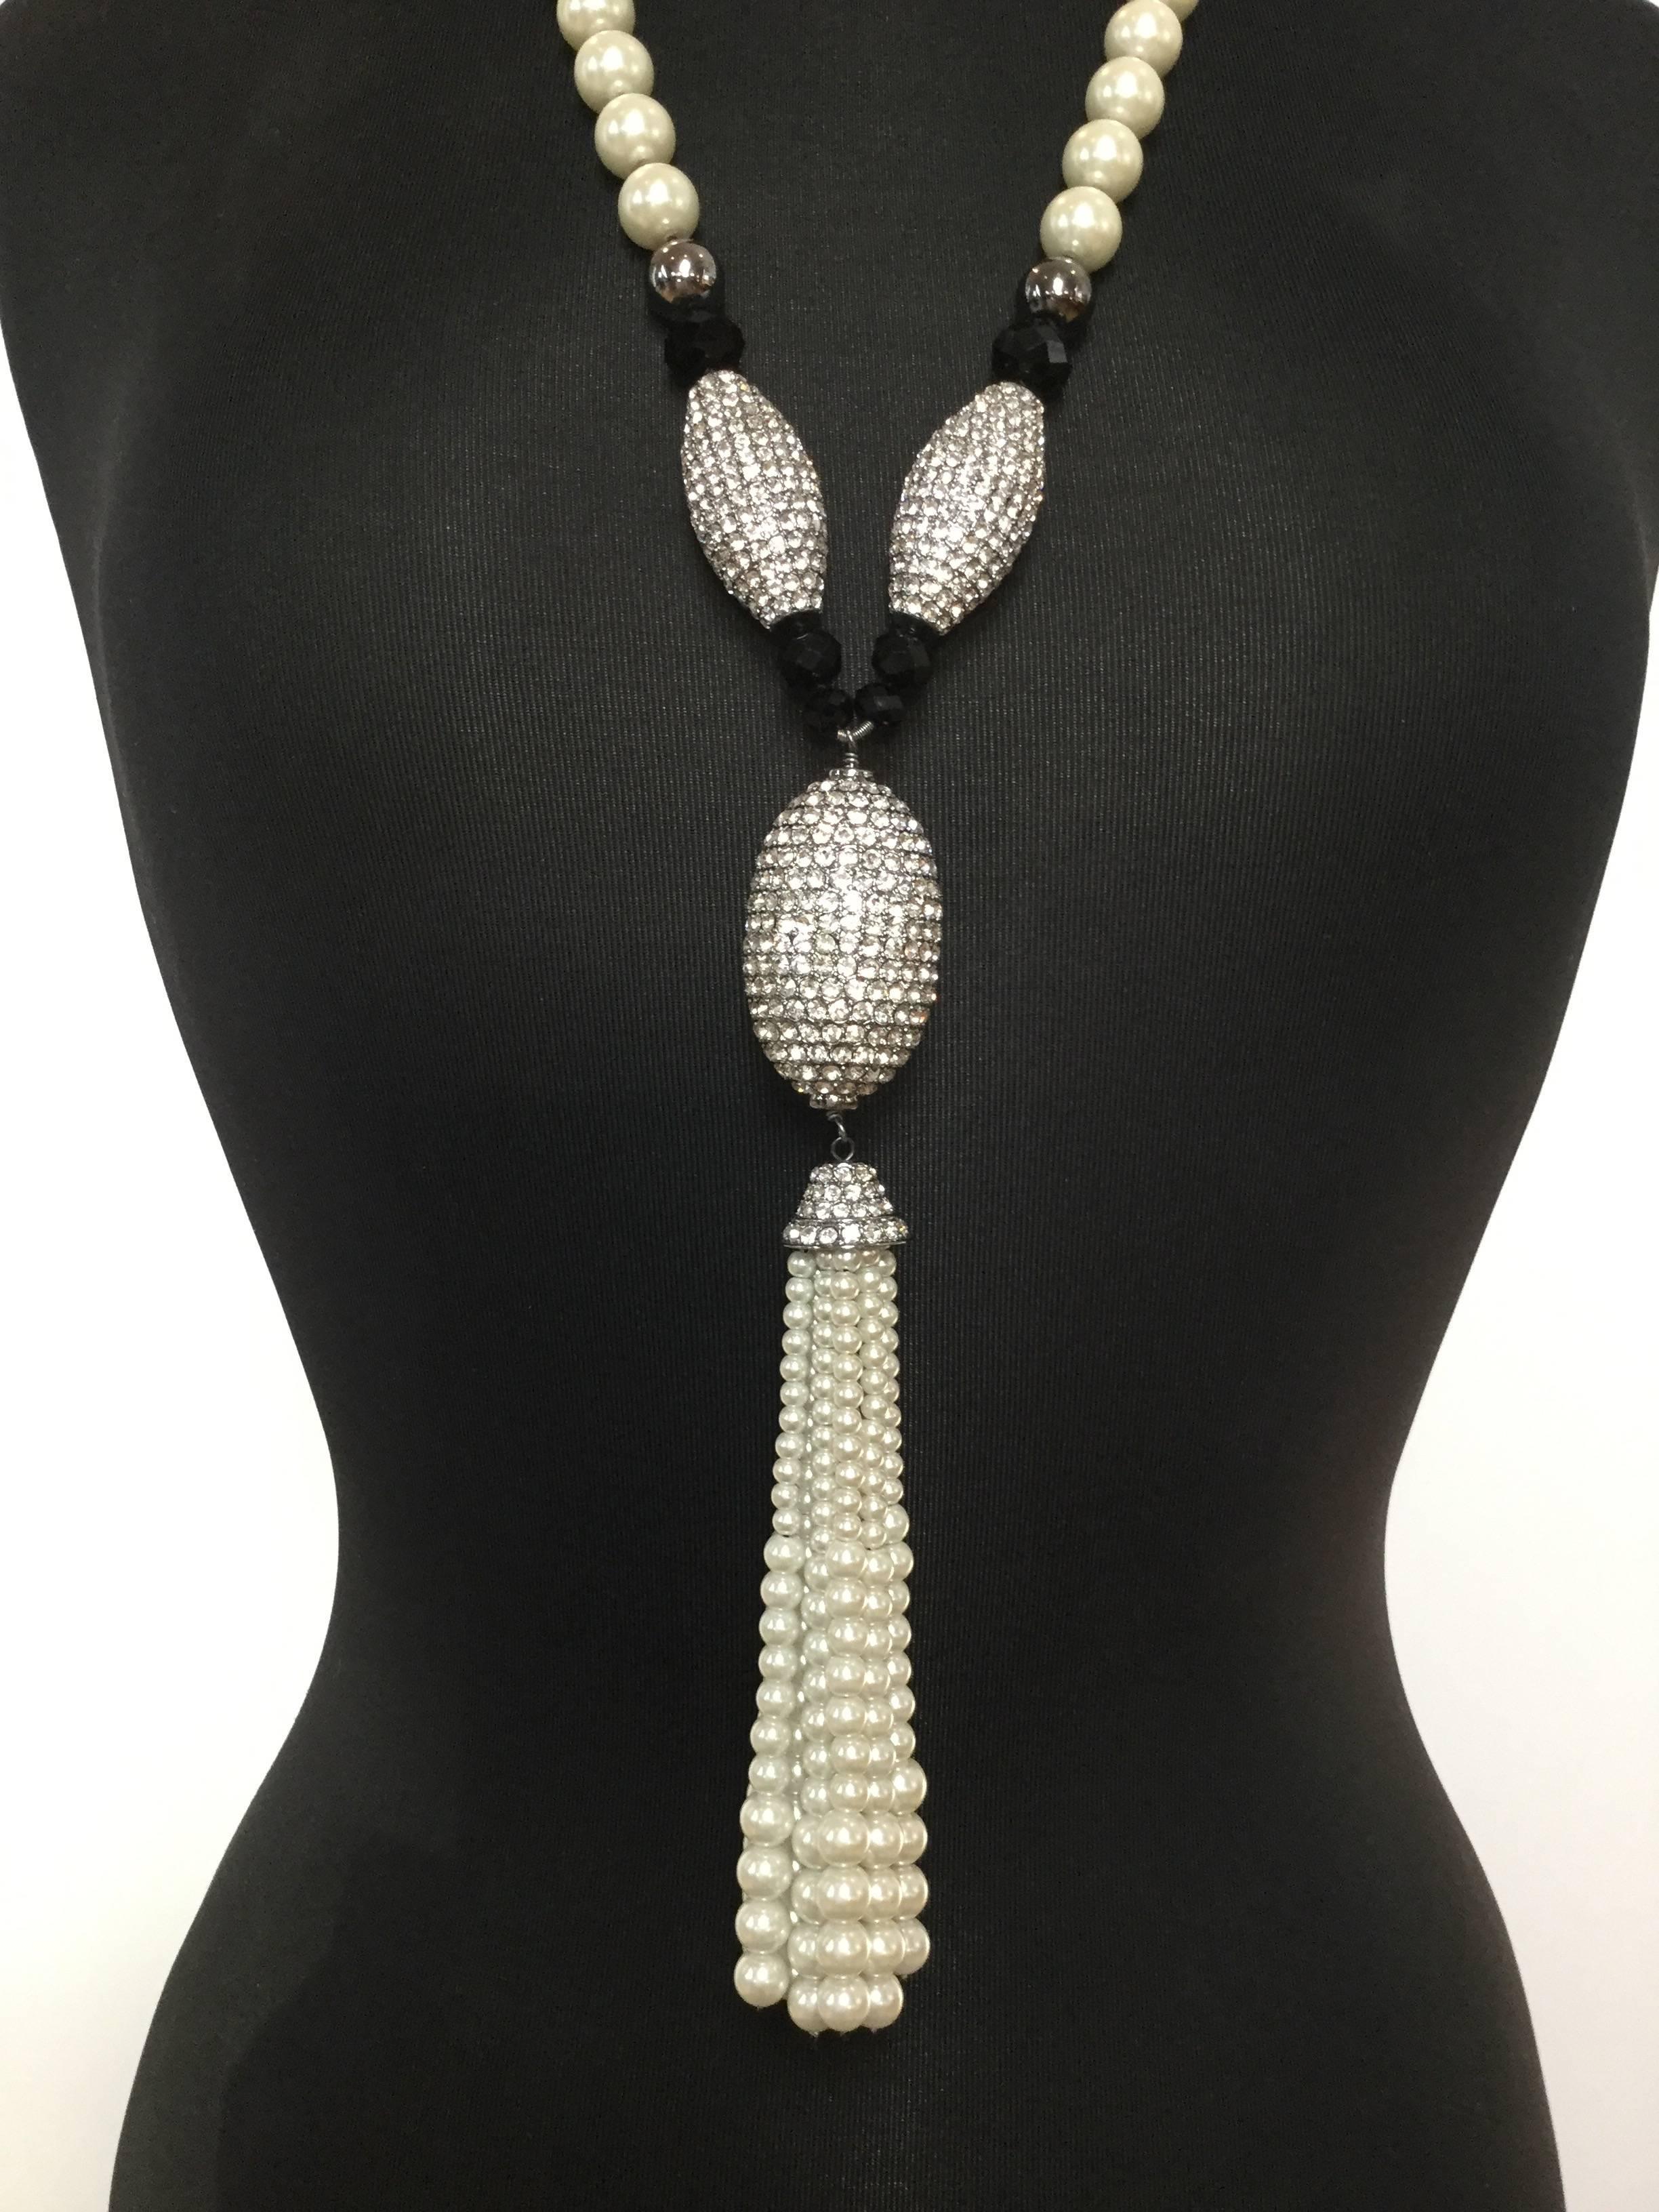 This stunning runway necklace is just huge and gorgeous!  Ultra long Yves Saint Laurent faux pearl, crystal, and jet glass sautoir.  All hand knotted. Incredible quality. Art Deco style featuring a central pave egg shaped focal which caps a ten